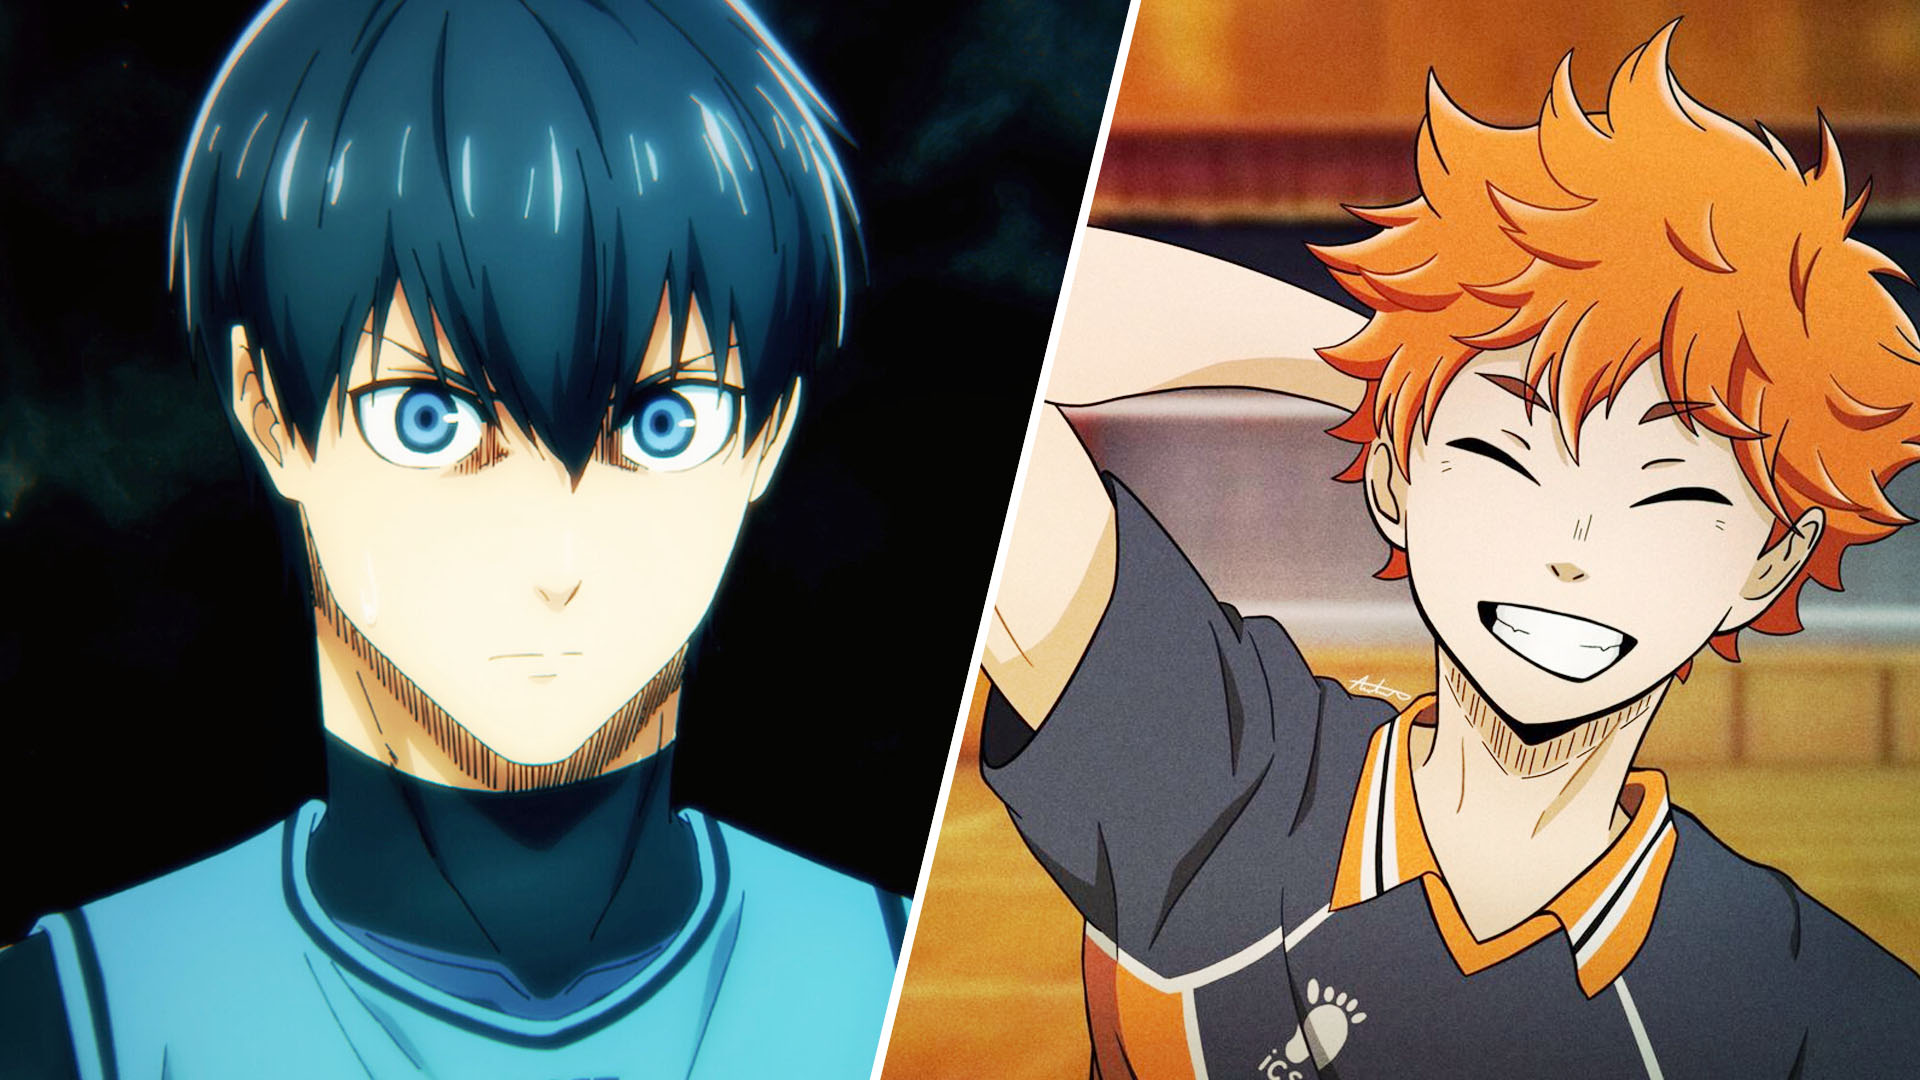 10 Sports Anime To Watch Other Than Haikyuu To Get Your Heart Racing